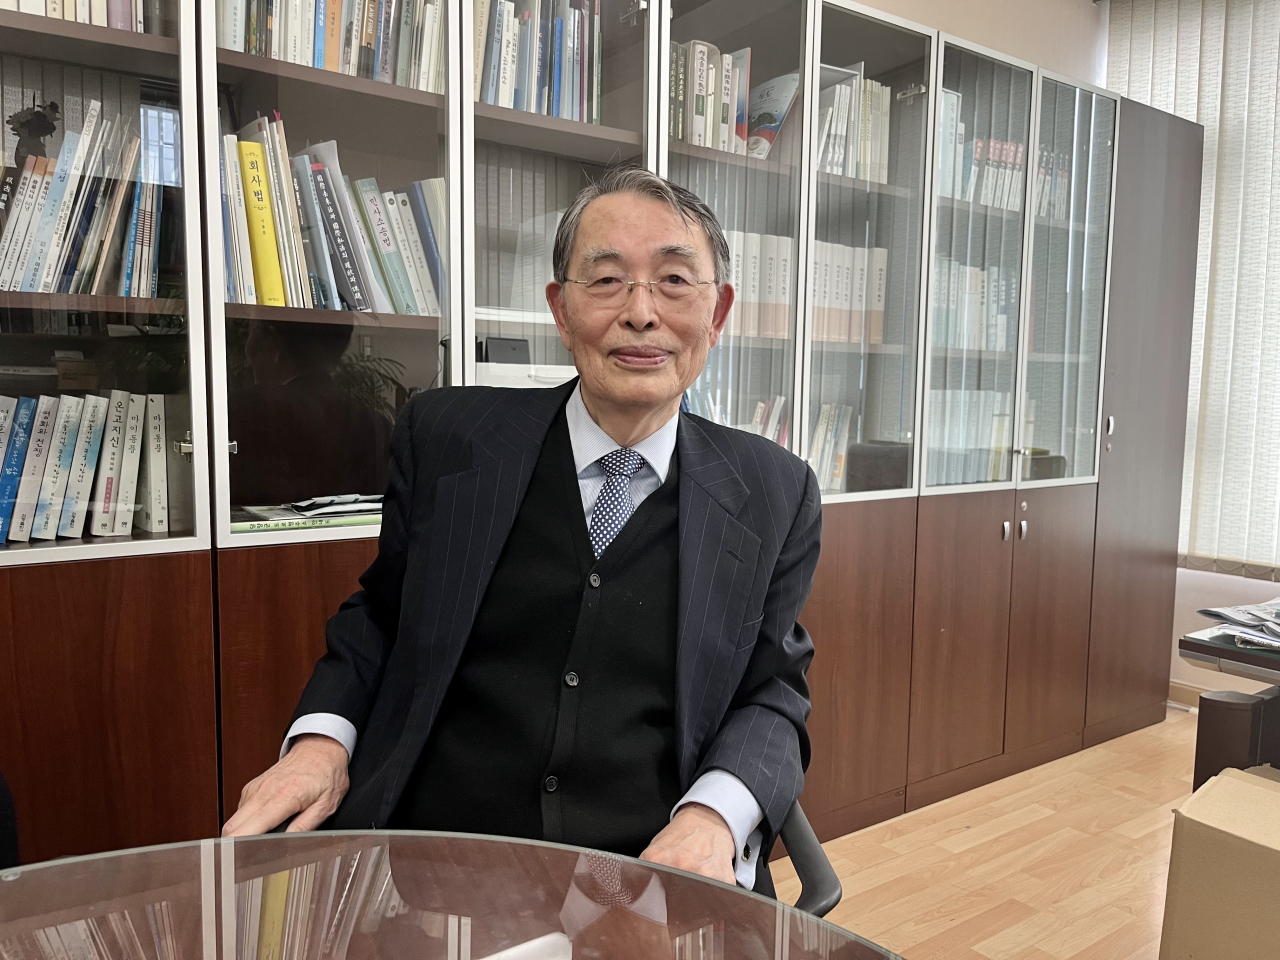 Judge Song Sang-hyun, the former chief of the International Criminal Court, speaks to The Korea Herald at his office on March 22. (Kim Arin/The Korea Herald)